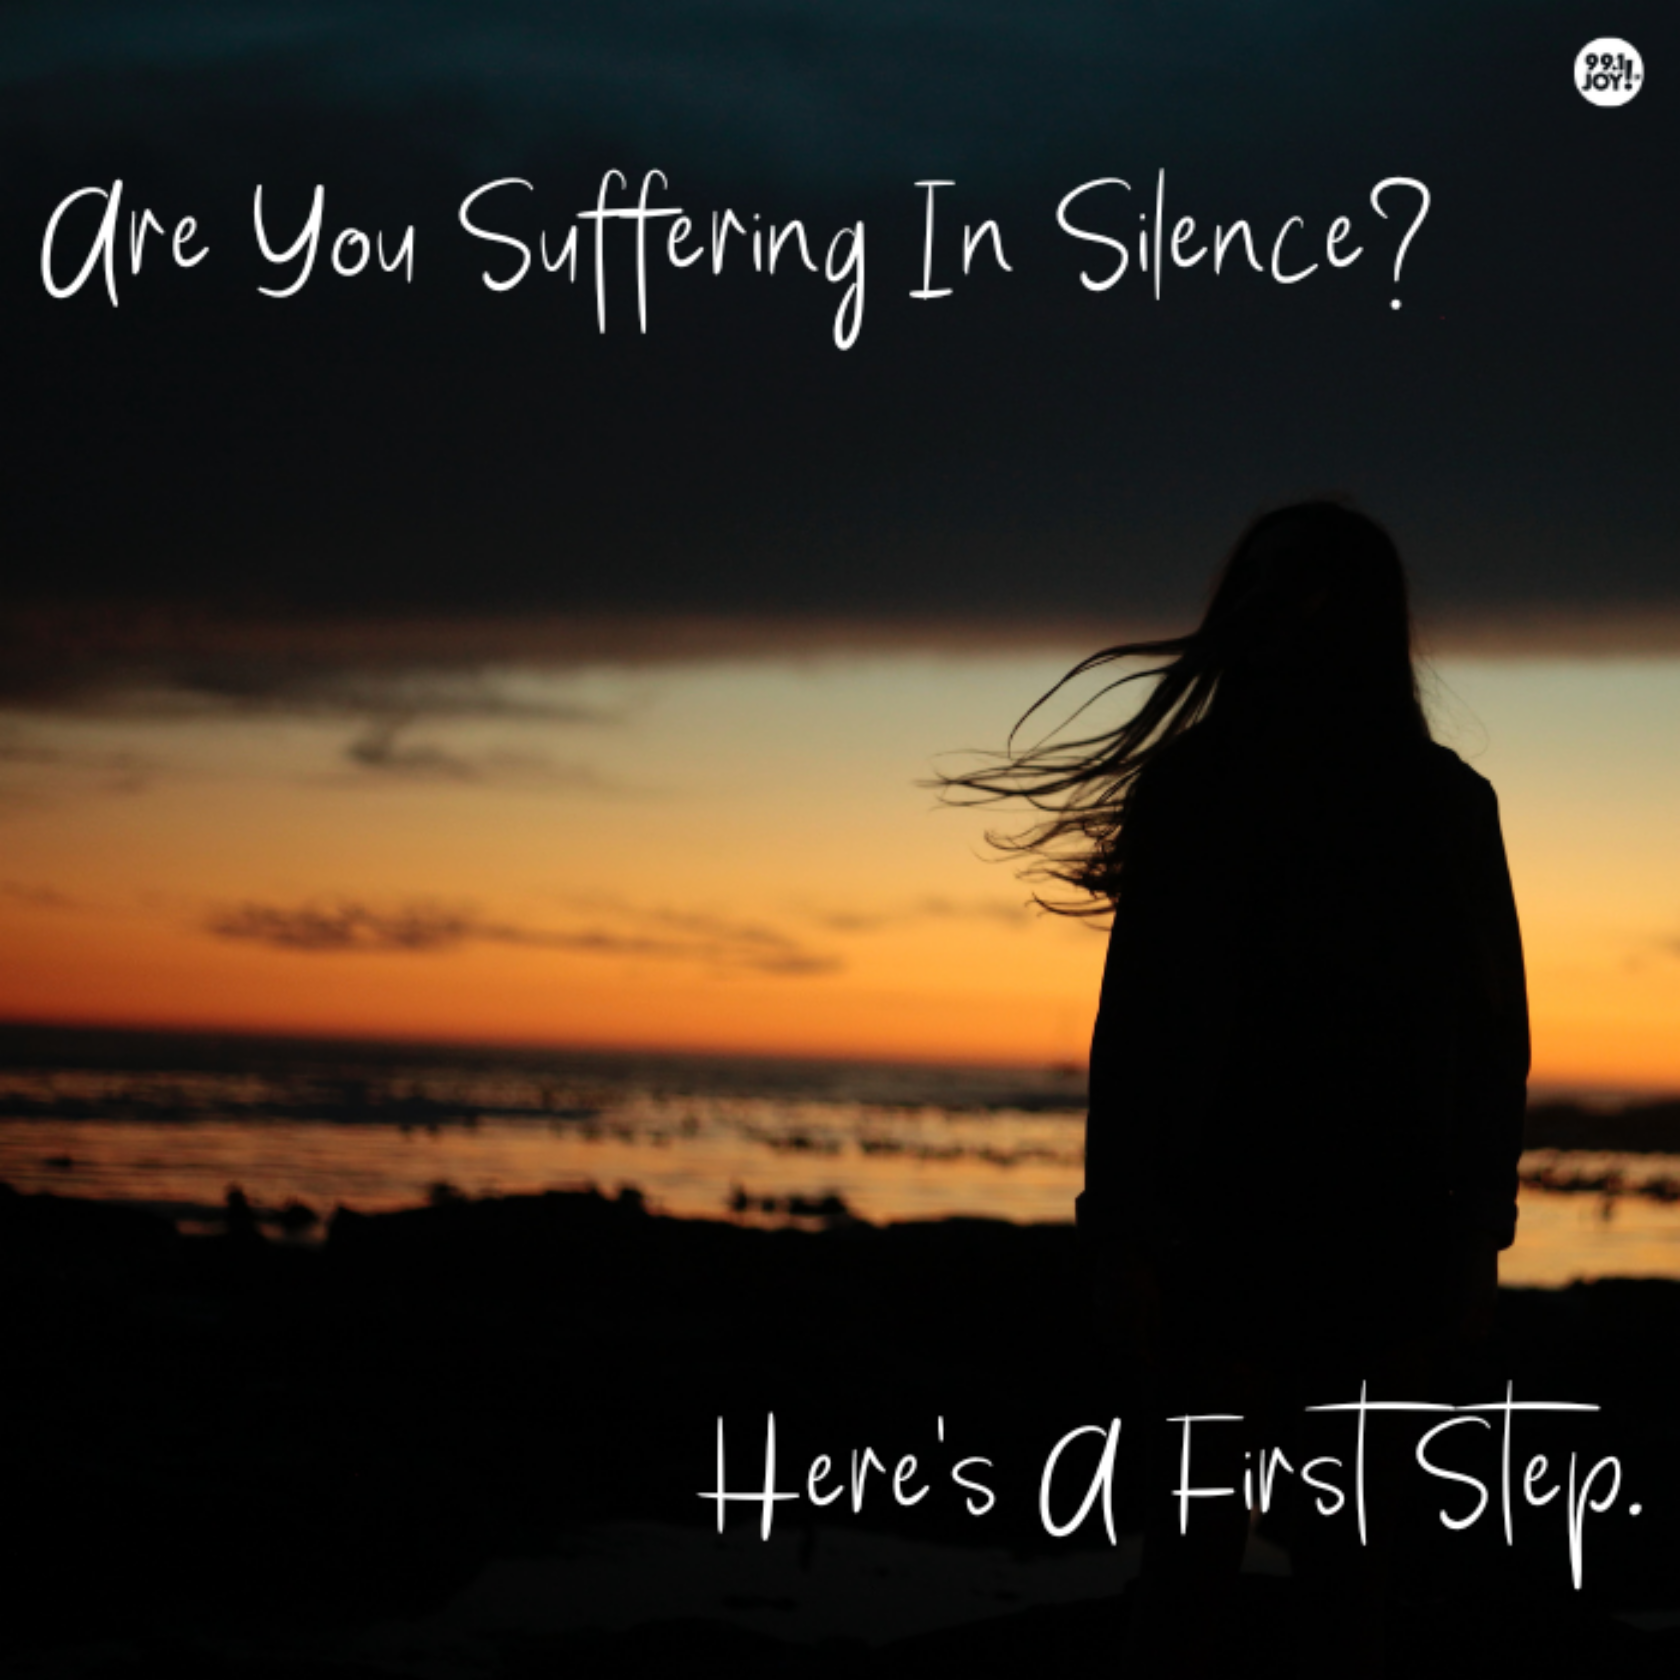 Are You Suffering In Silence? Here’s A First Step.